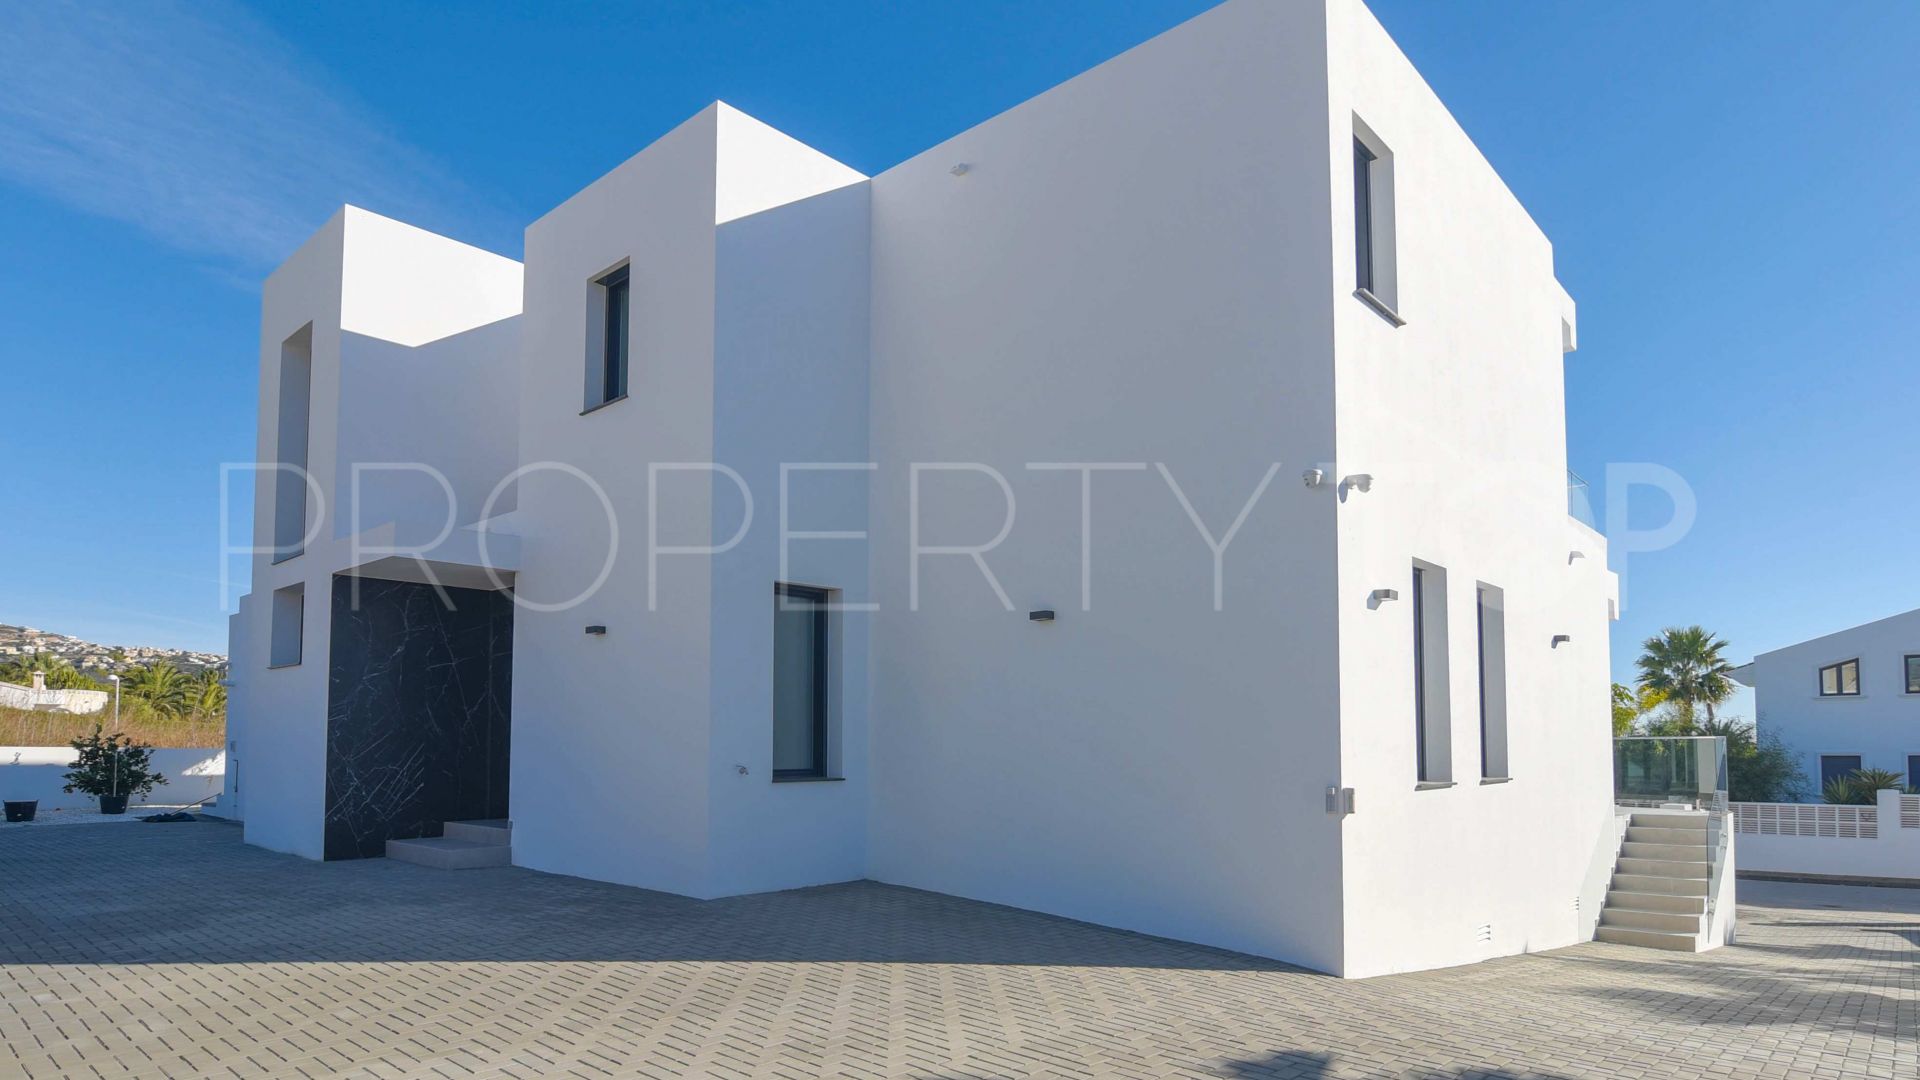 Villa for sale in Moraira with 4 bedrooms